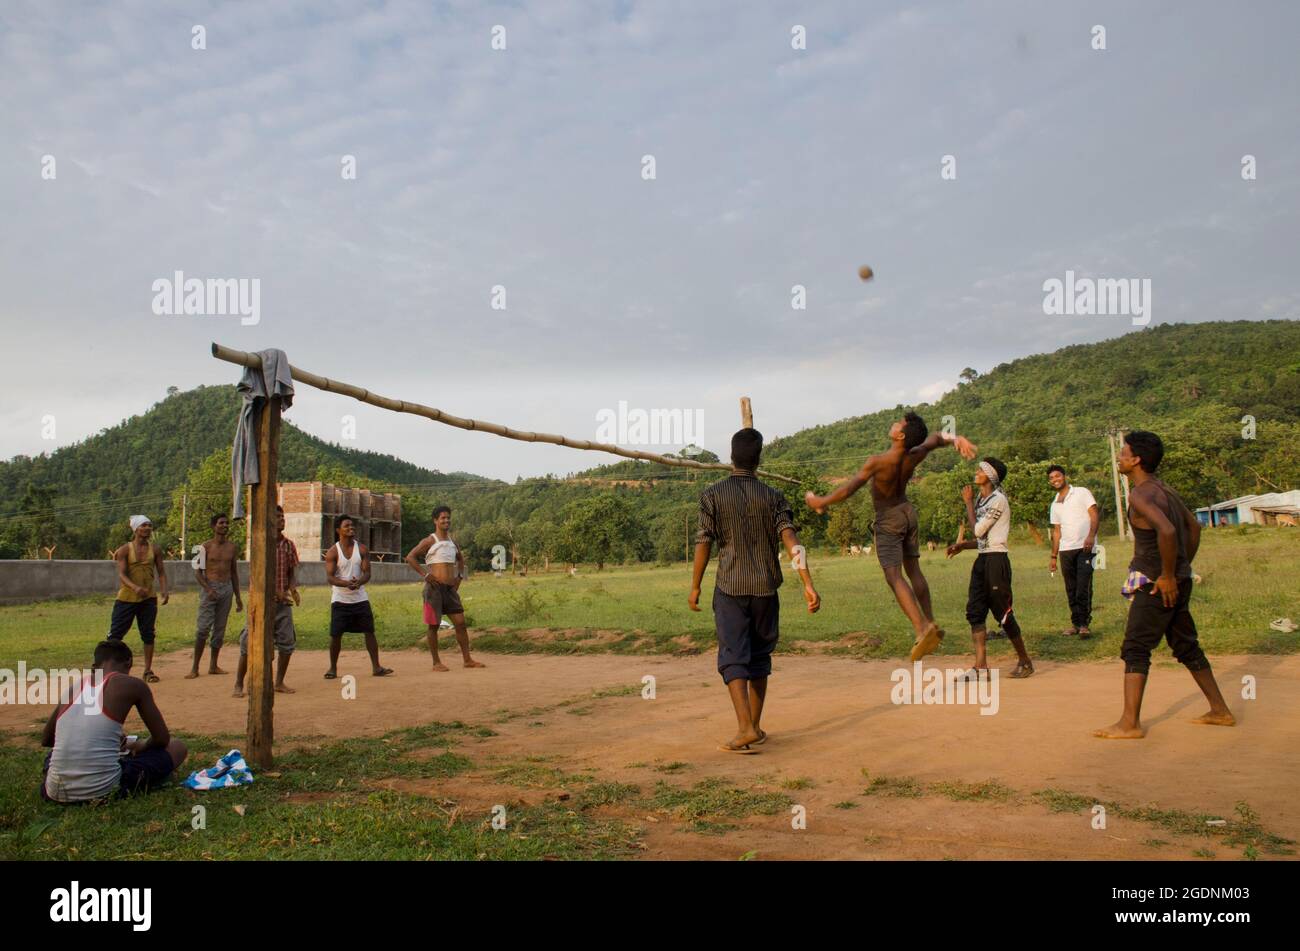 Villagers are playing a local volleyball game in Odisha, India. Stock Photo